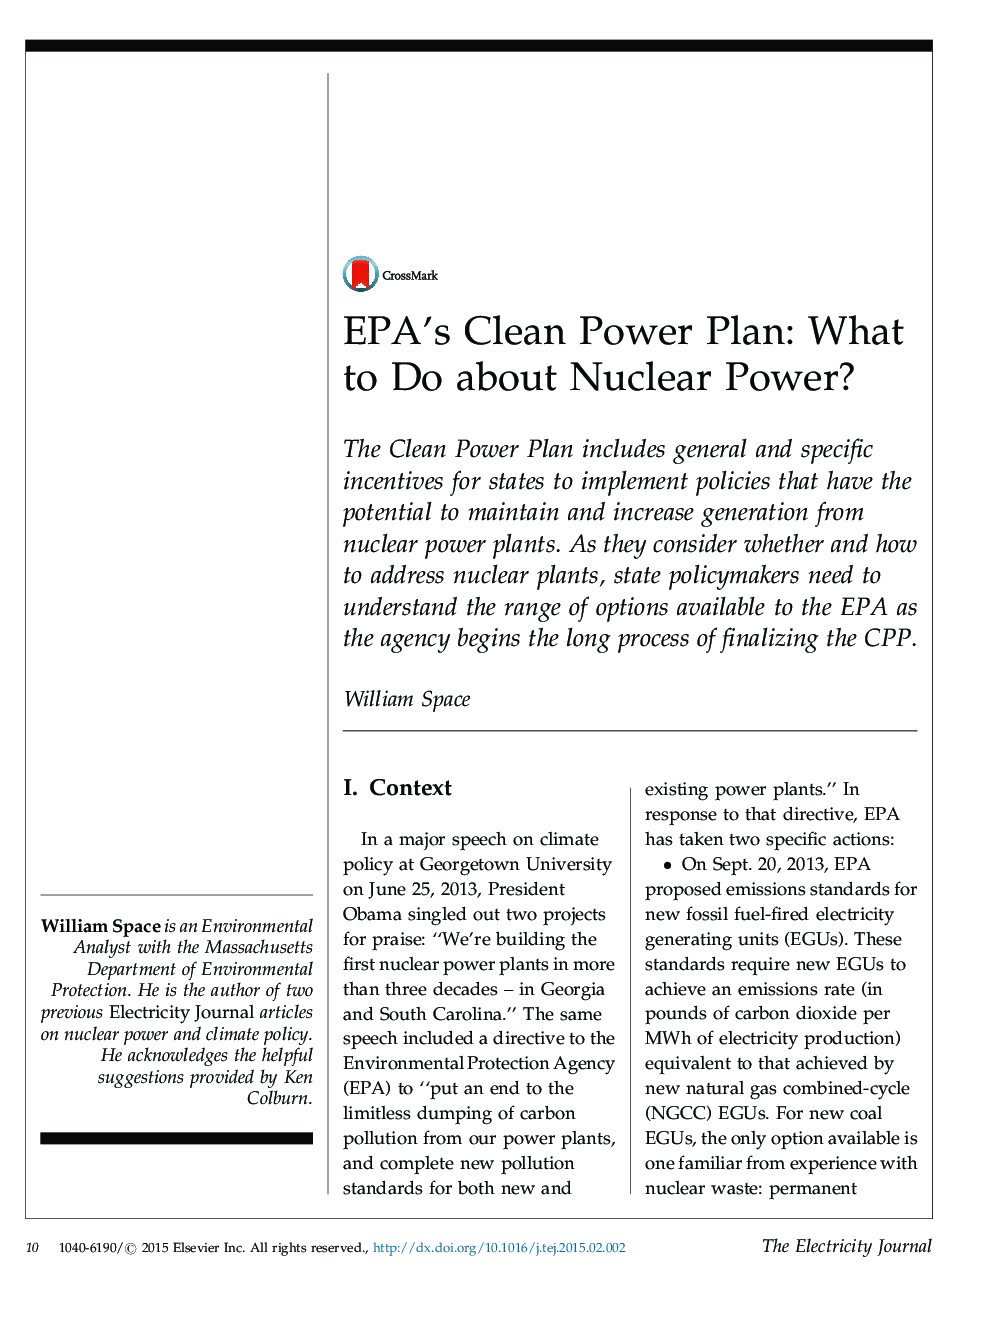 EPA's Clean Power Plan: What to Do about Nuclear Power?